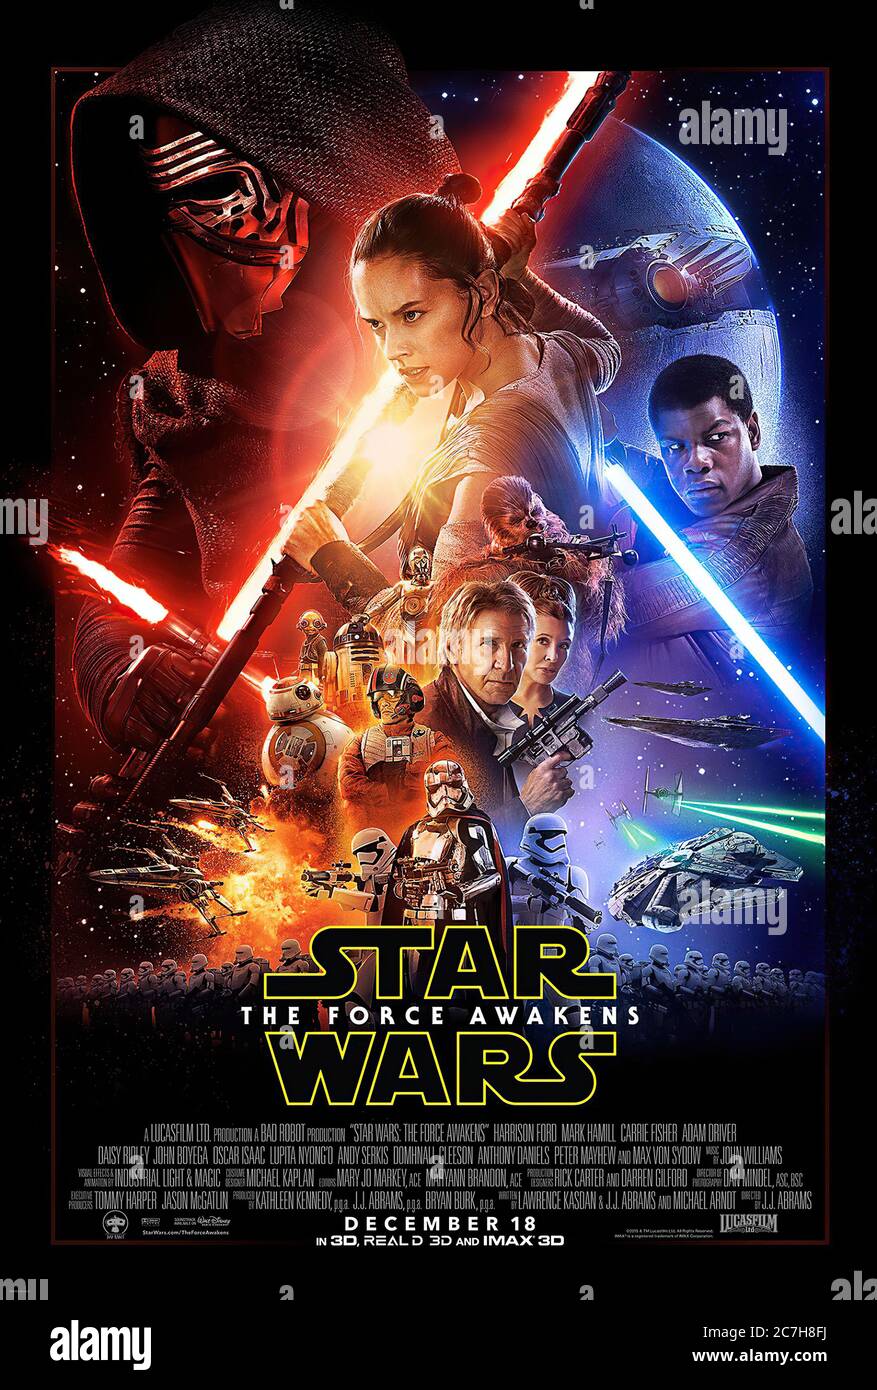 Star Wars Episode Vii  the Force Awakens - Movie Poster Stock Photo